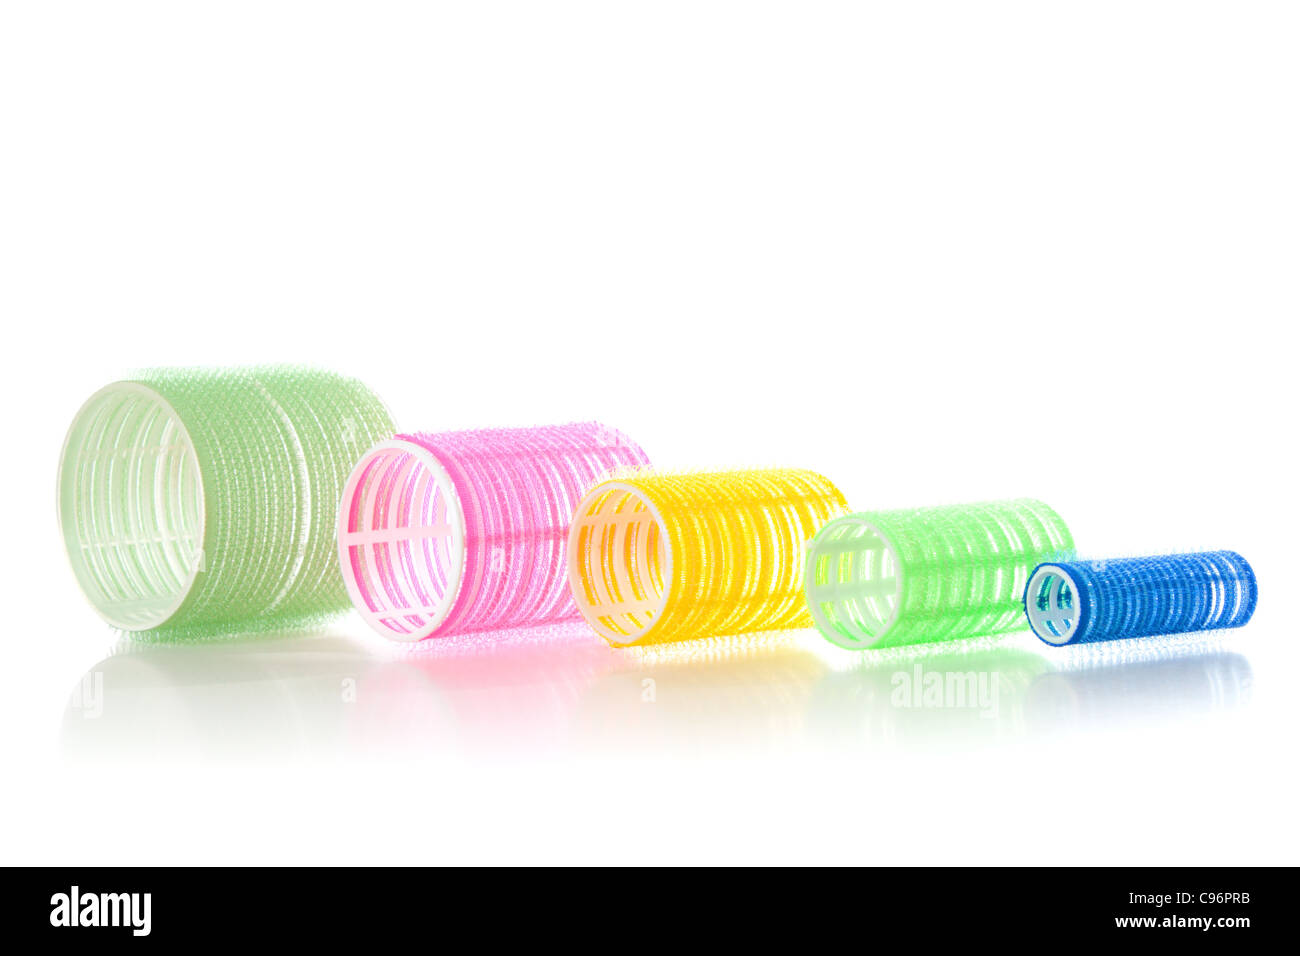 Multicolored hair curlers isolated over white background Stock Photo